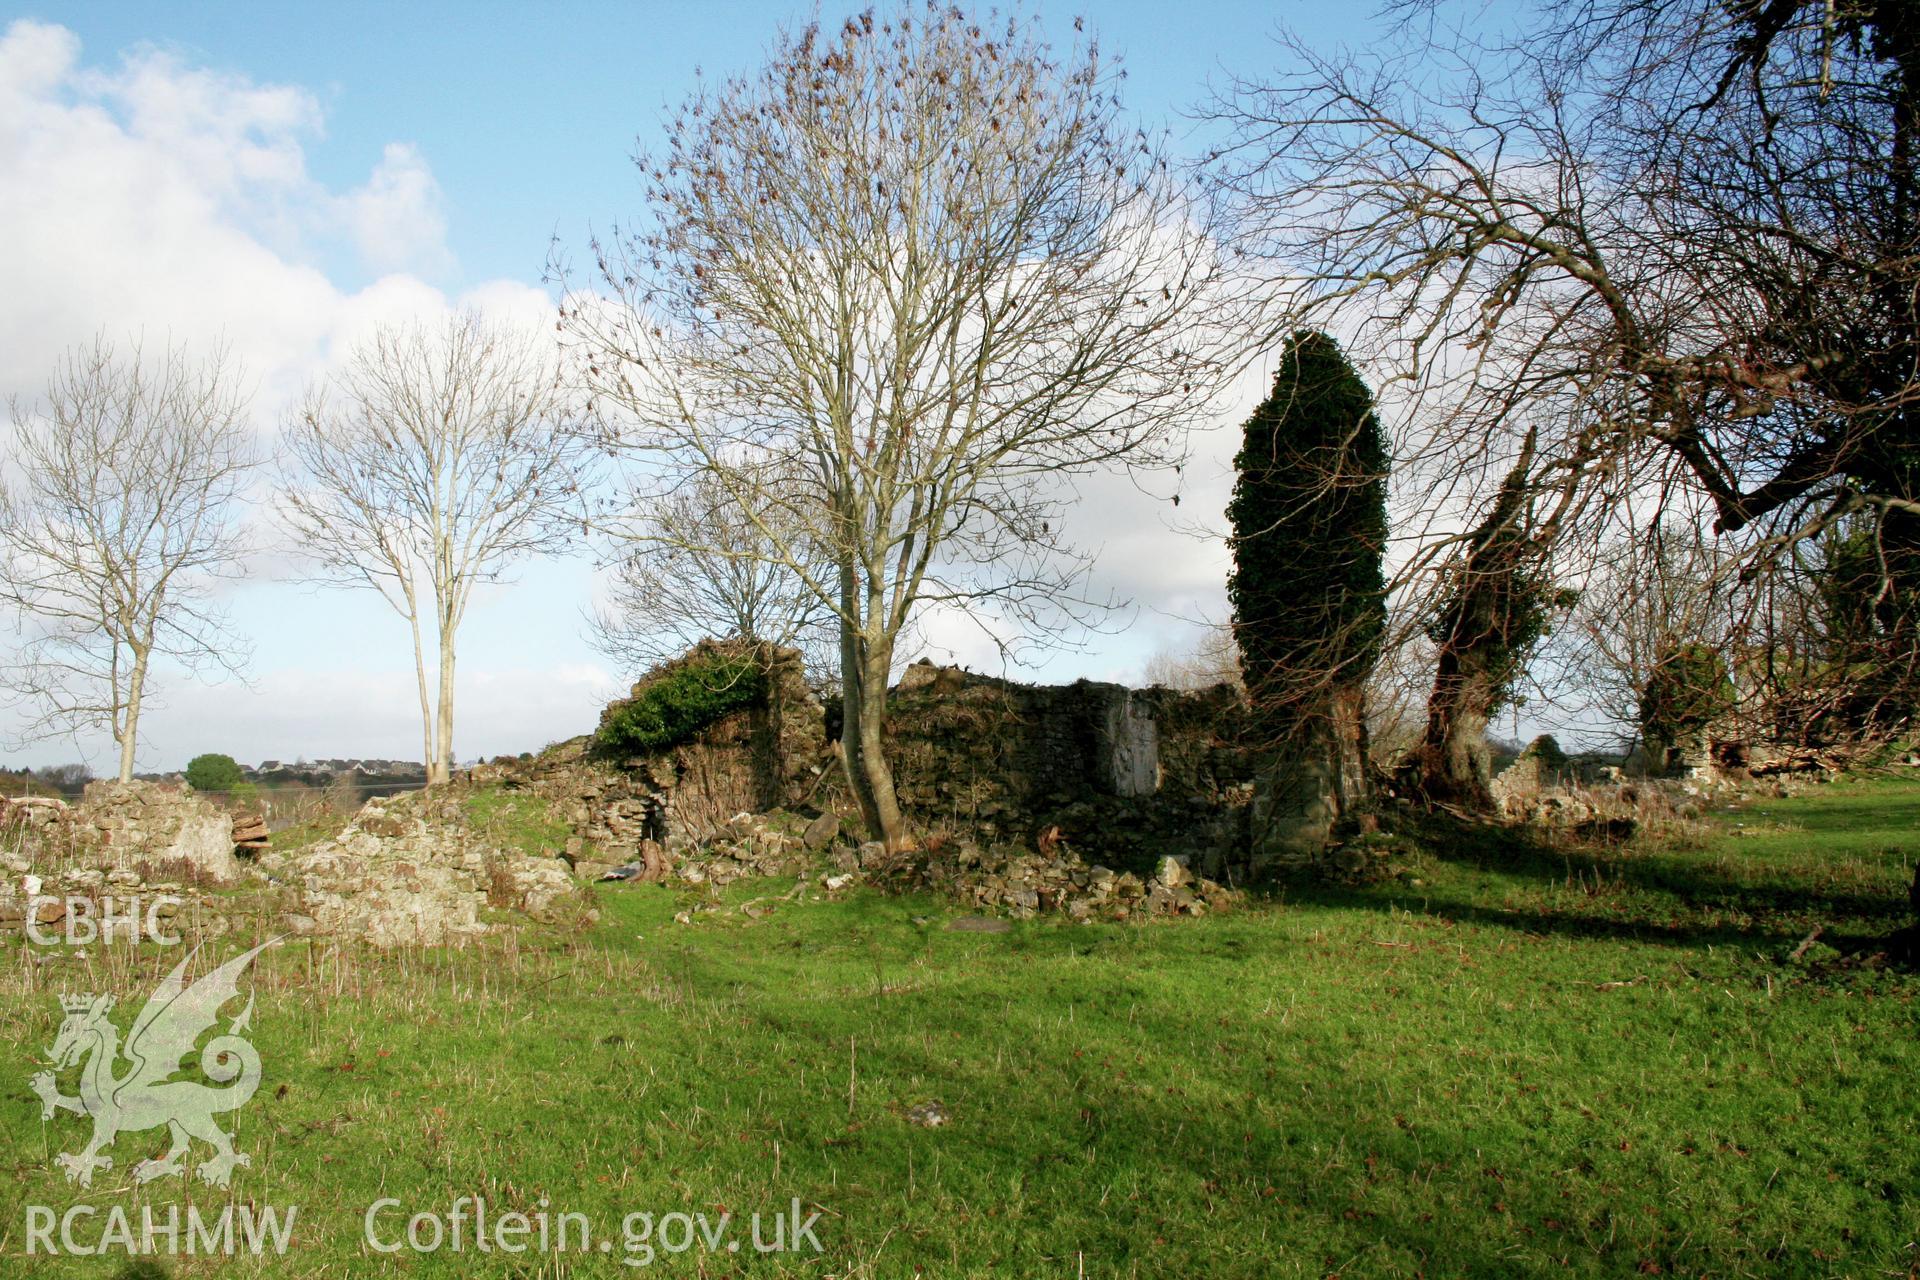 Haroldston House. Remains of the medieval hall from the south-west.  The ivy clad southern end of the hall is fronted by a wall of finely cut masonry.